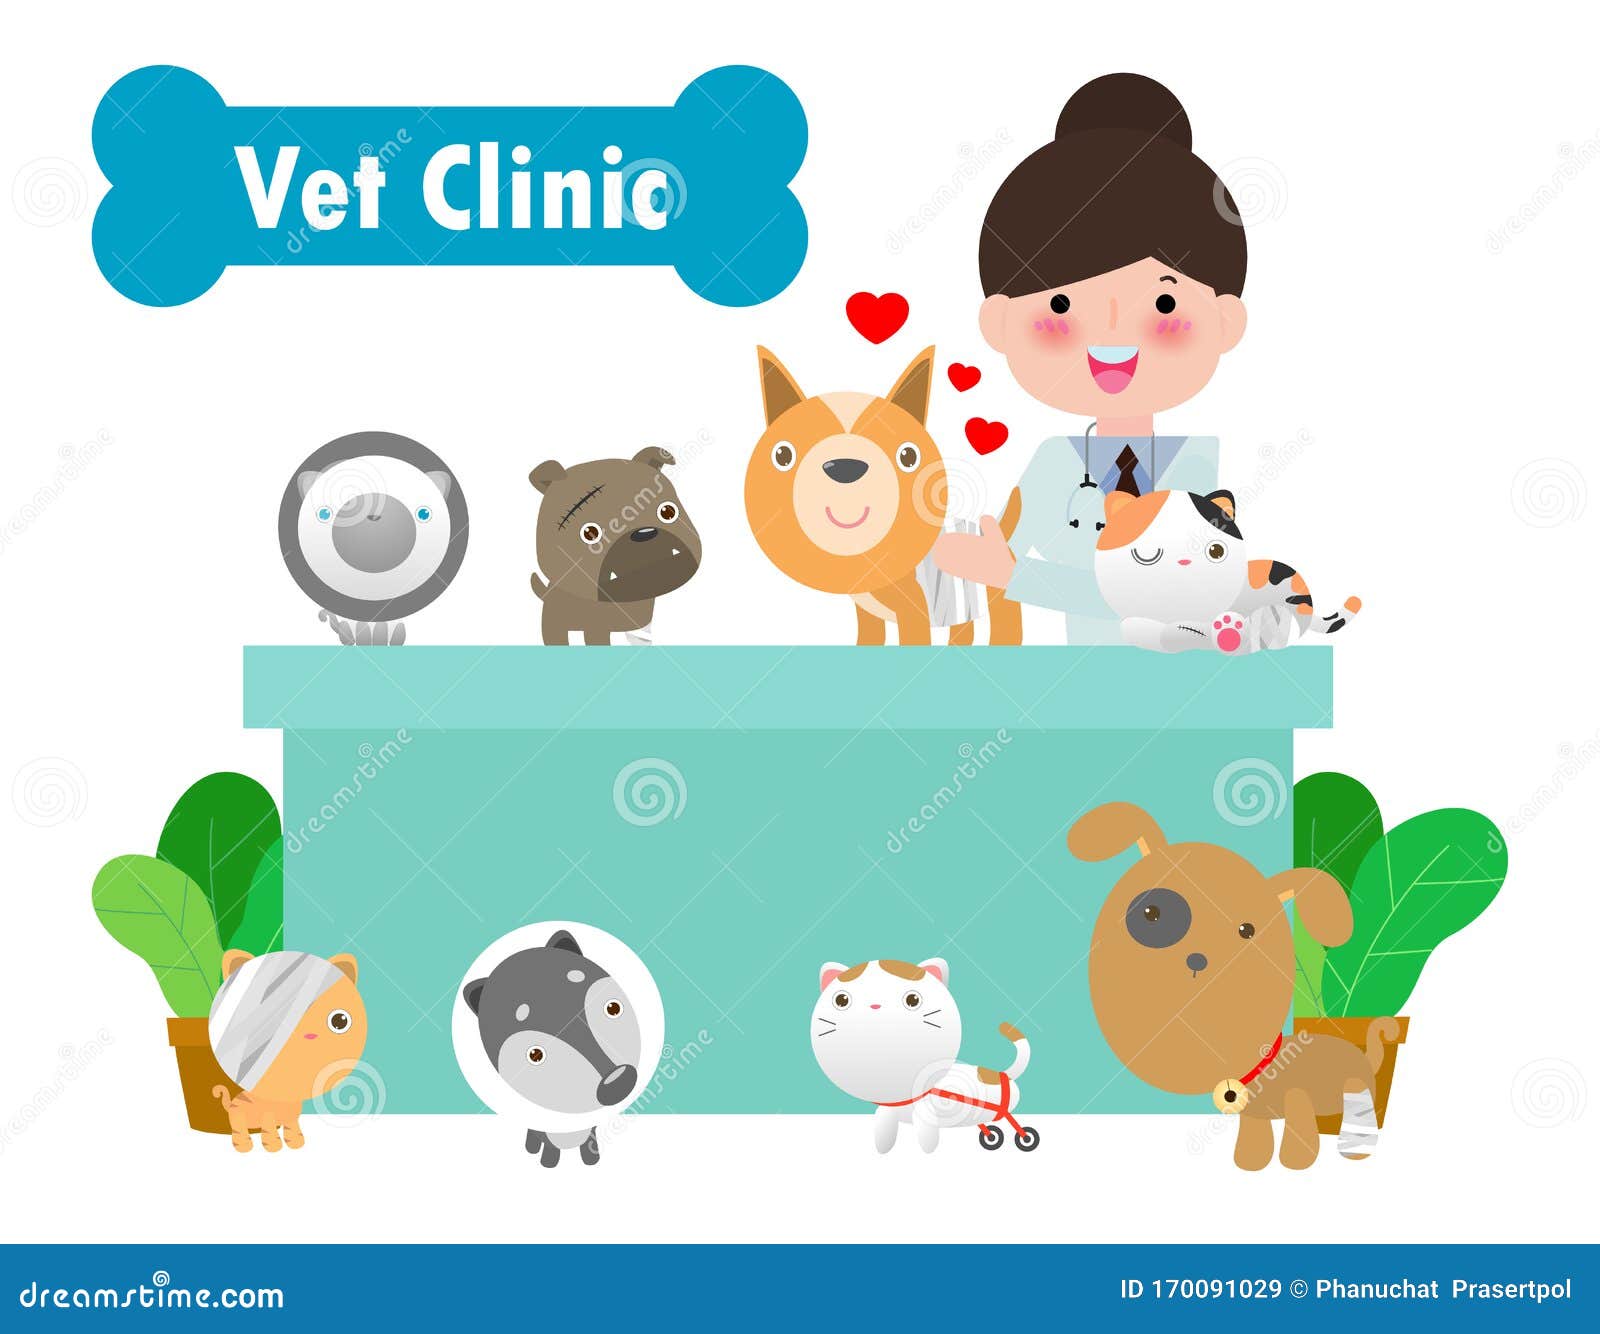 Veterinarian Doctor Surrounded with Pets Get Sick , Vet Clinic Concept of  Medicine and Pet Care Isolated on White Background Stock Vector -  Illustration of graphic, health: 170091029